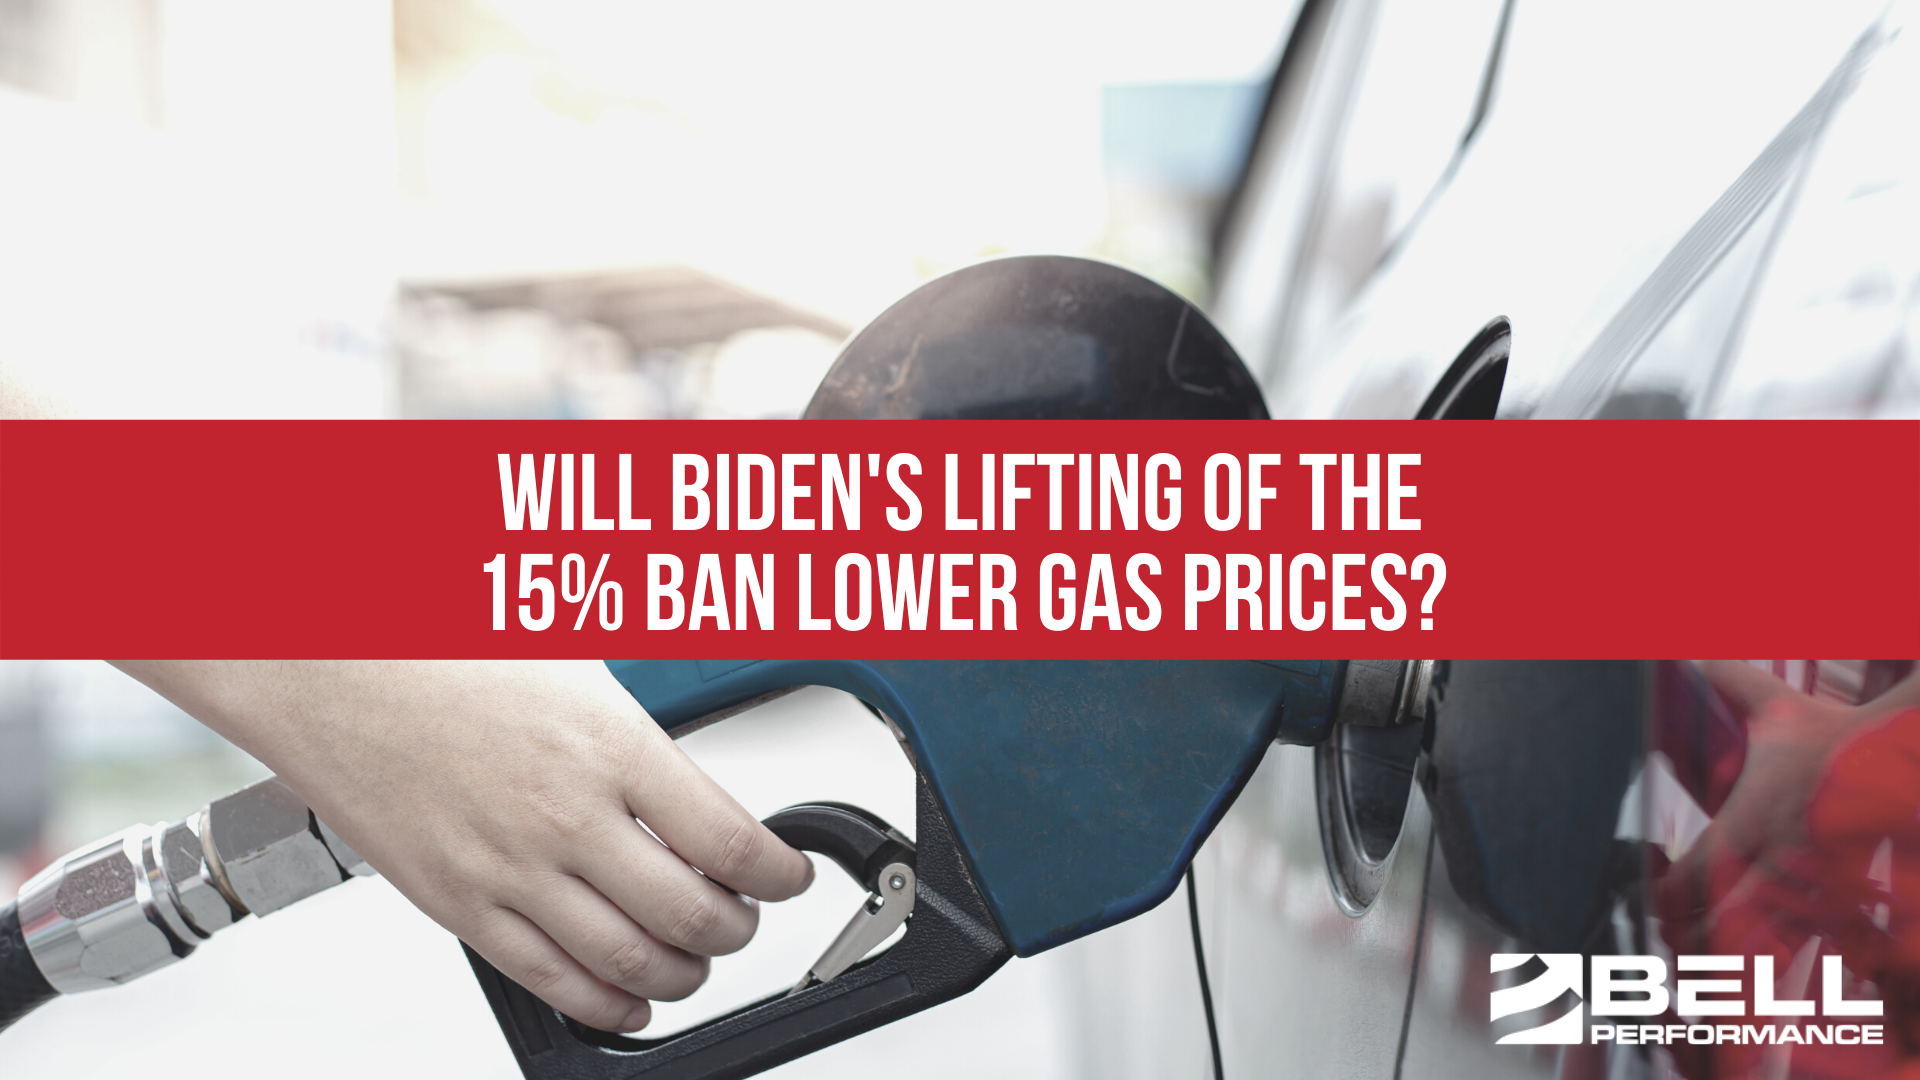 Will Biden's Lifting Of The 15% Ban lower gas prices?